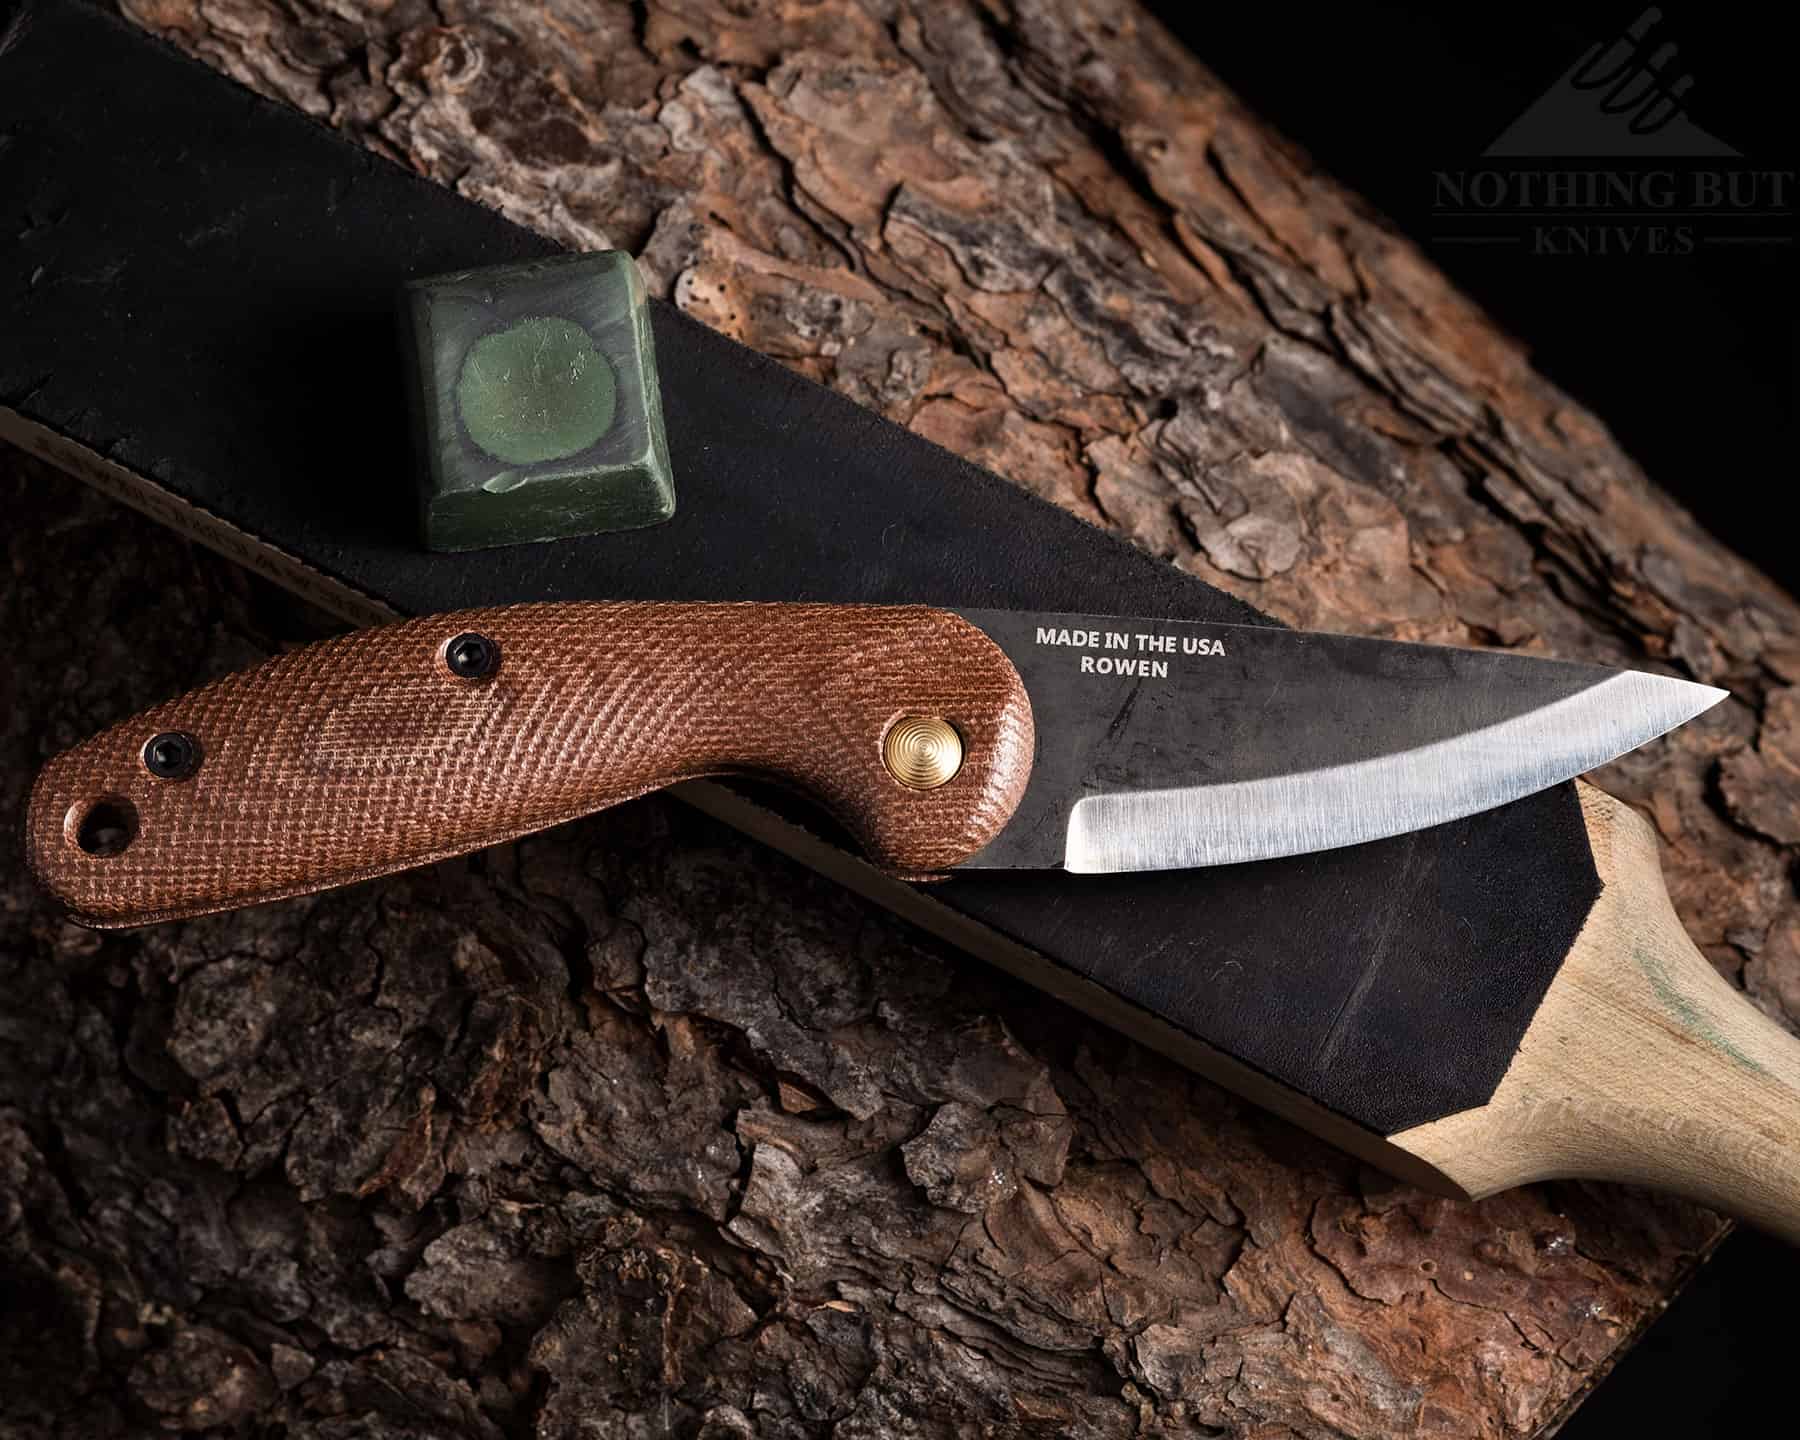 The Esee Pinhoti would be easier to sharpen if it had a sharpening choil.